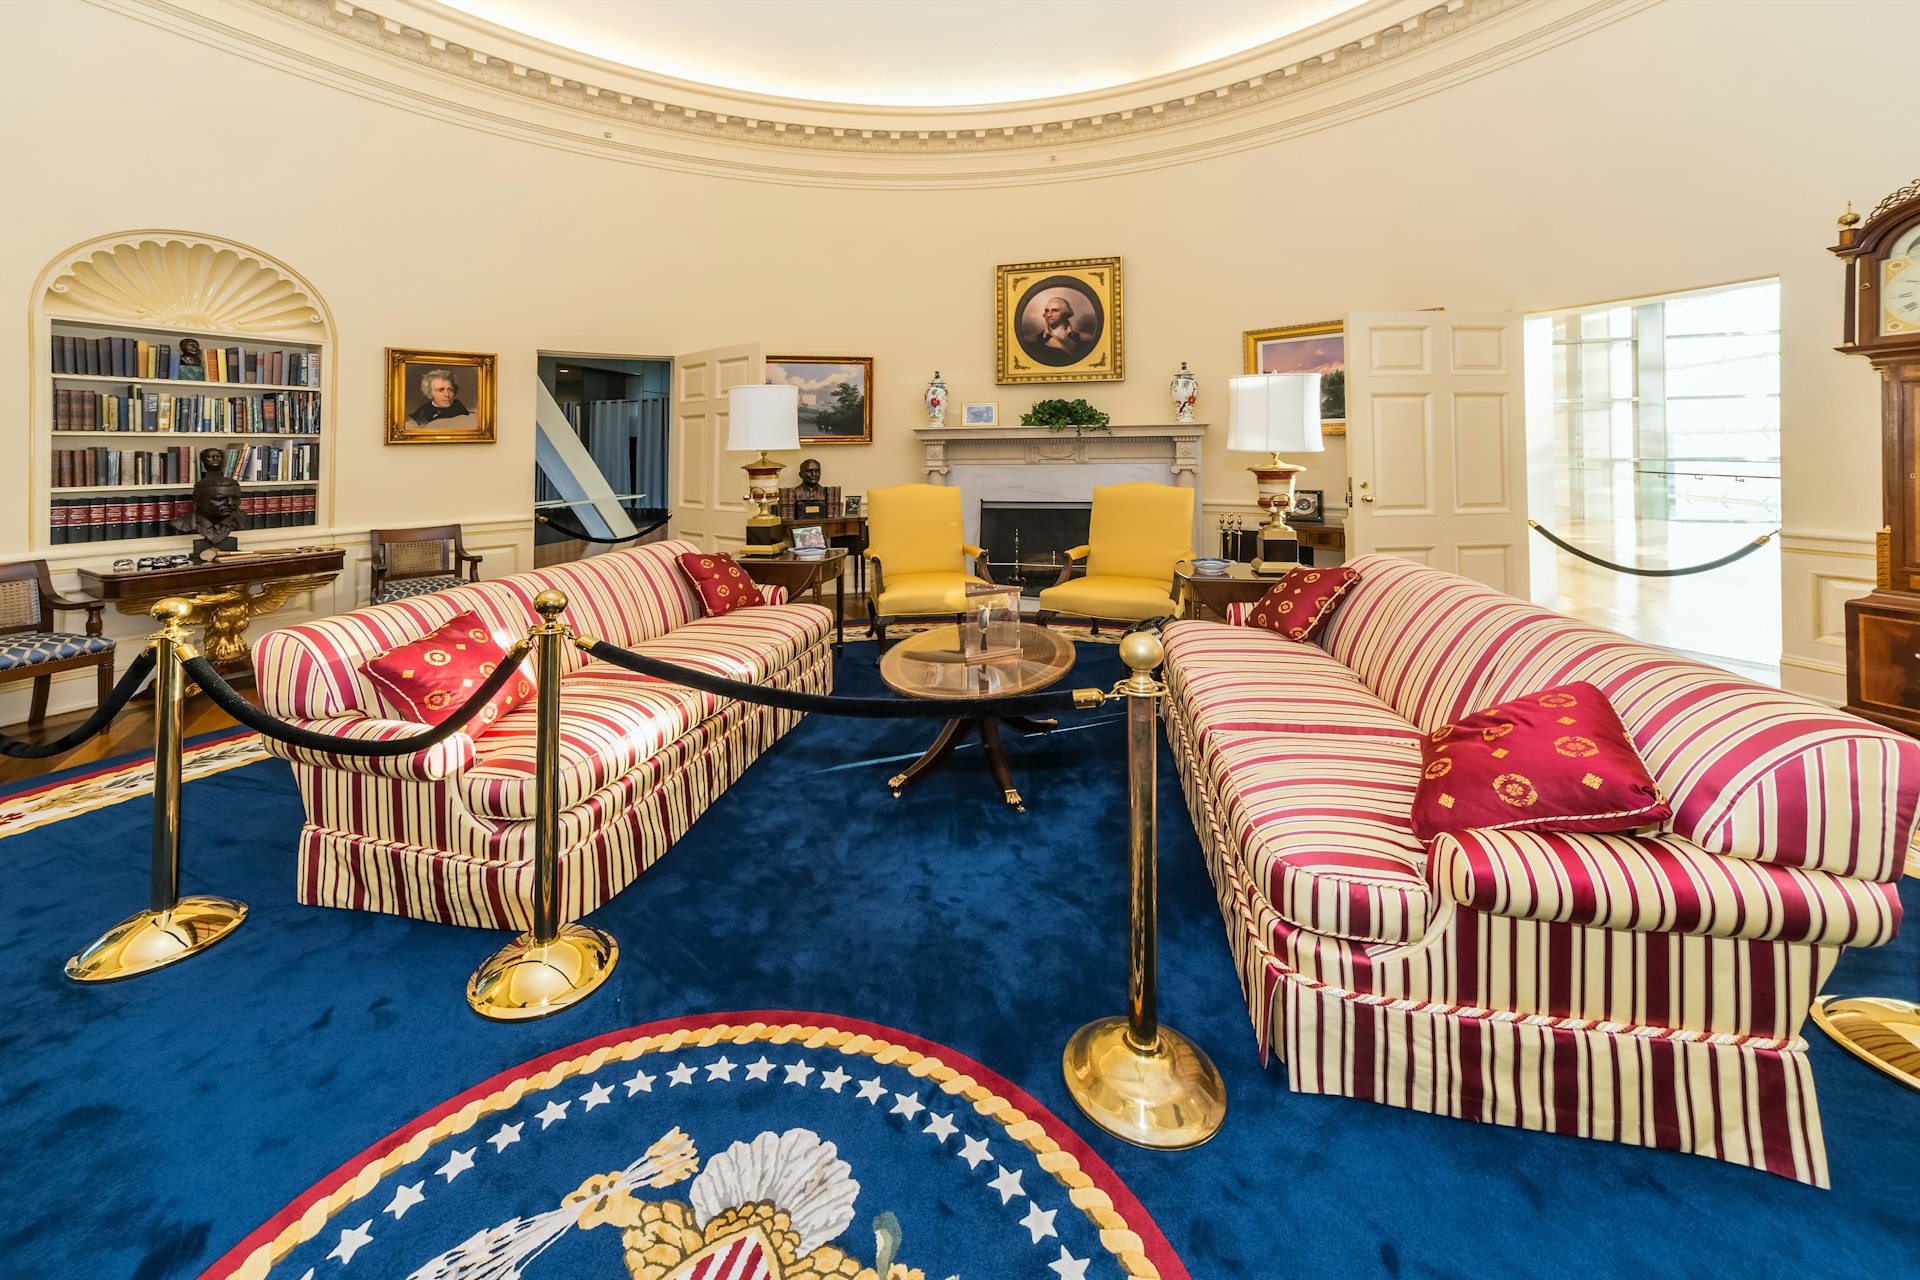 Replica of White House's Oval Office in William J. Clinton Presidential Center and Library in Little Rock, Arkansas